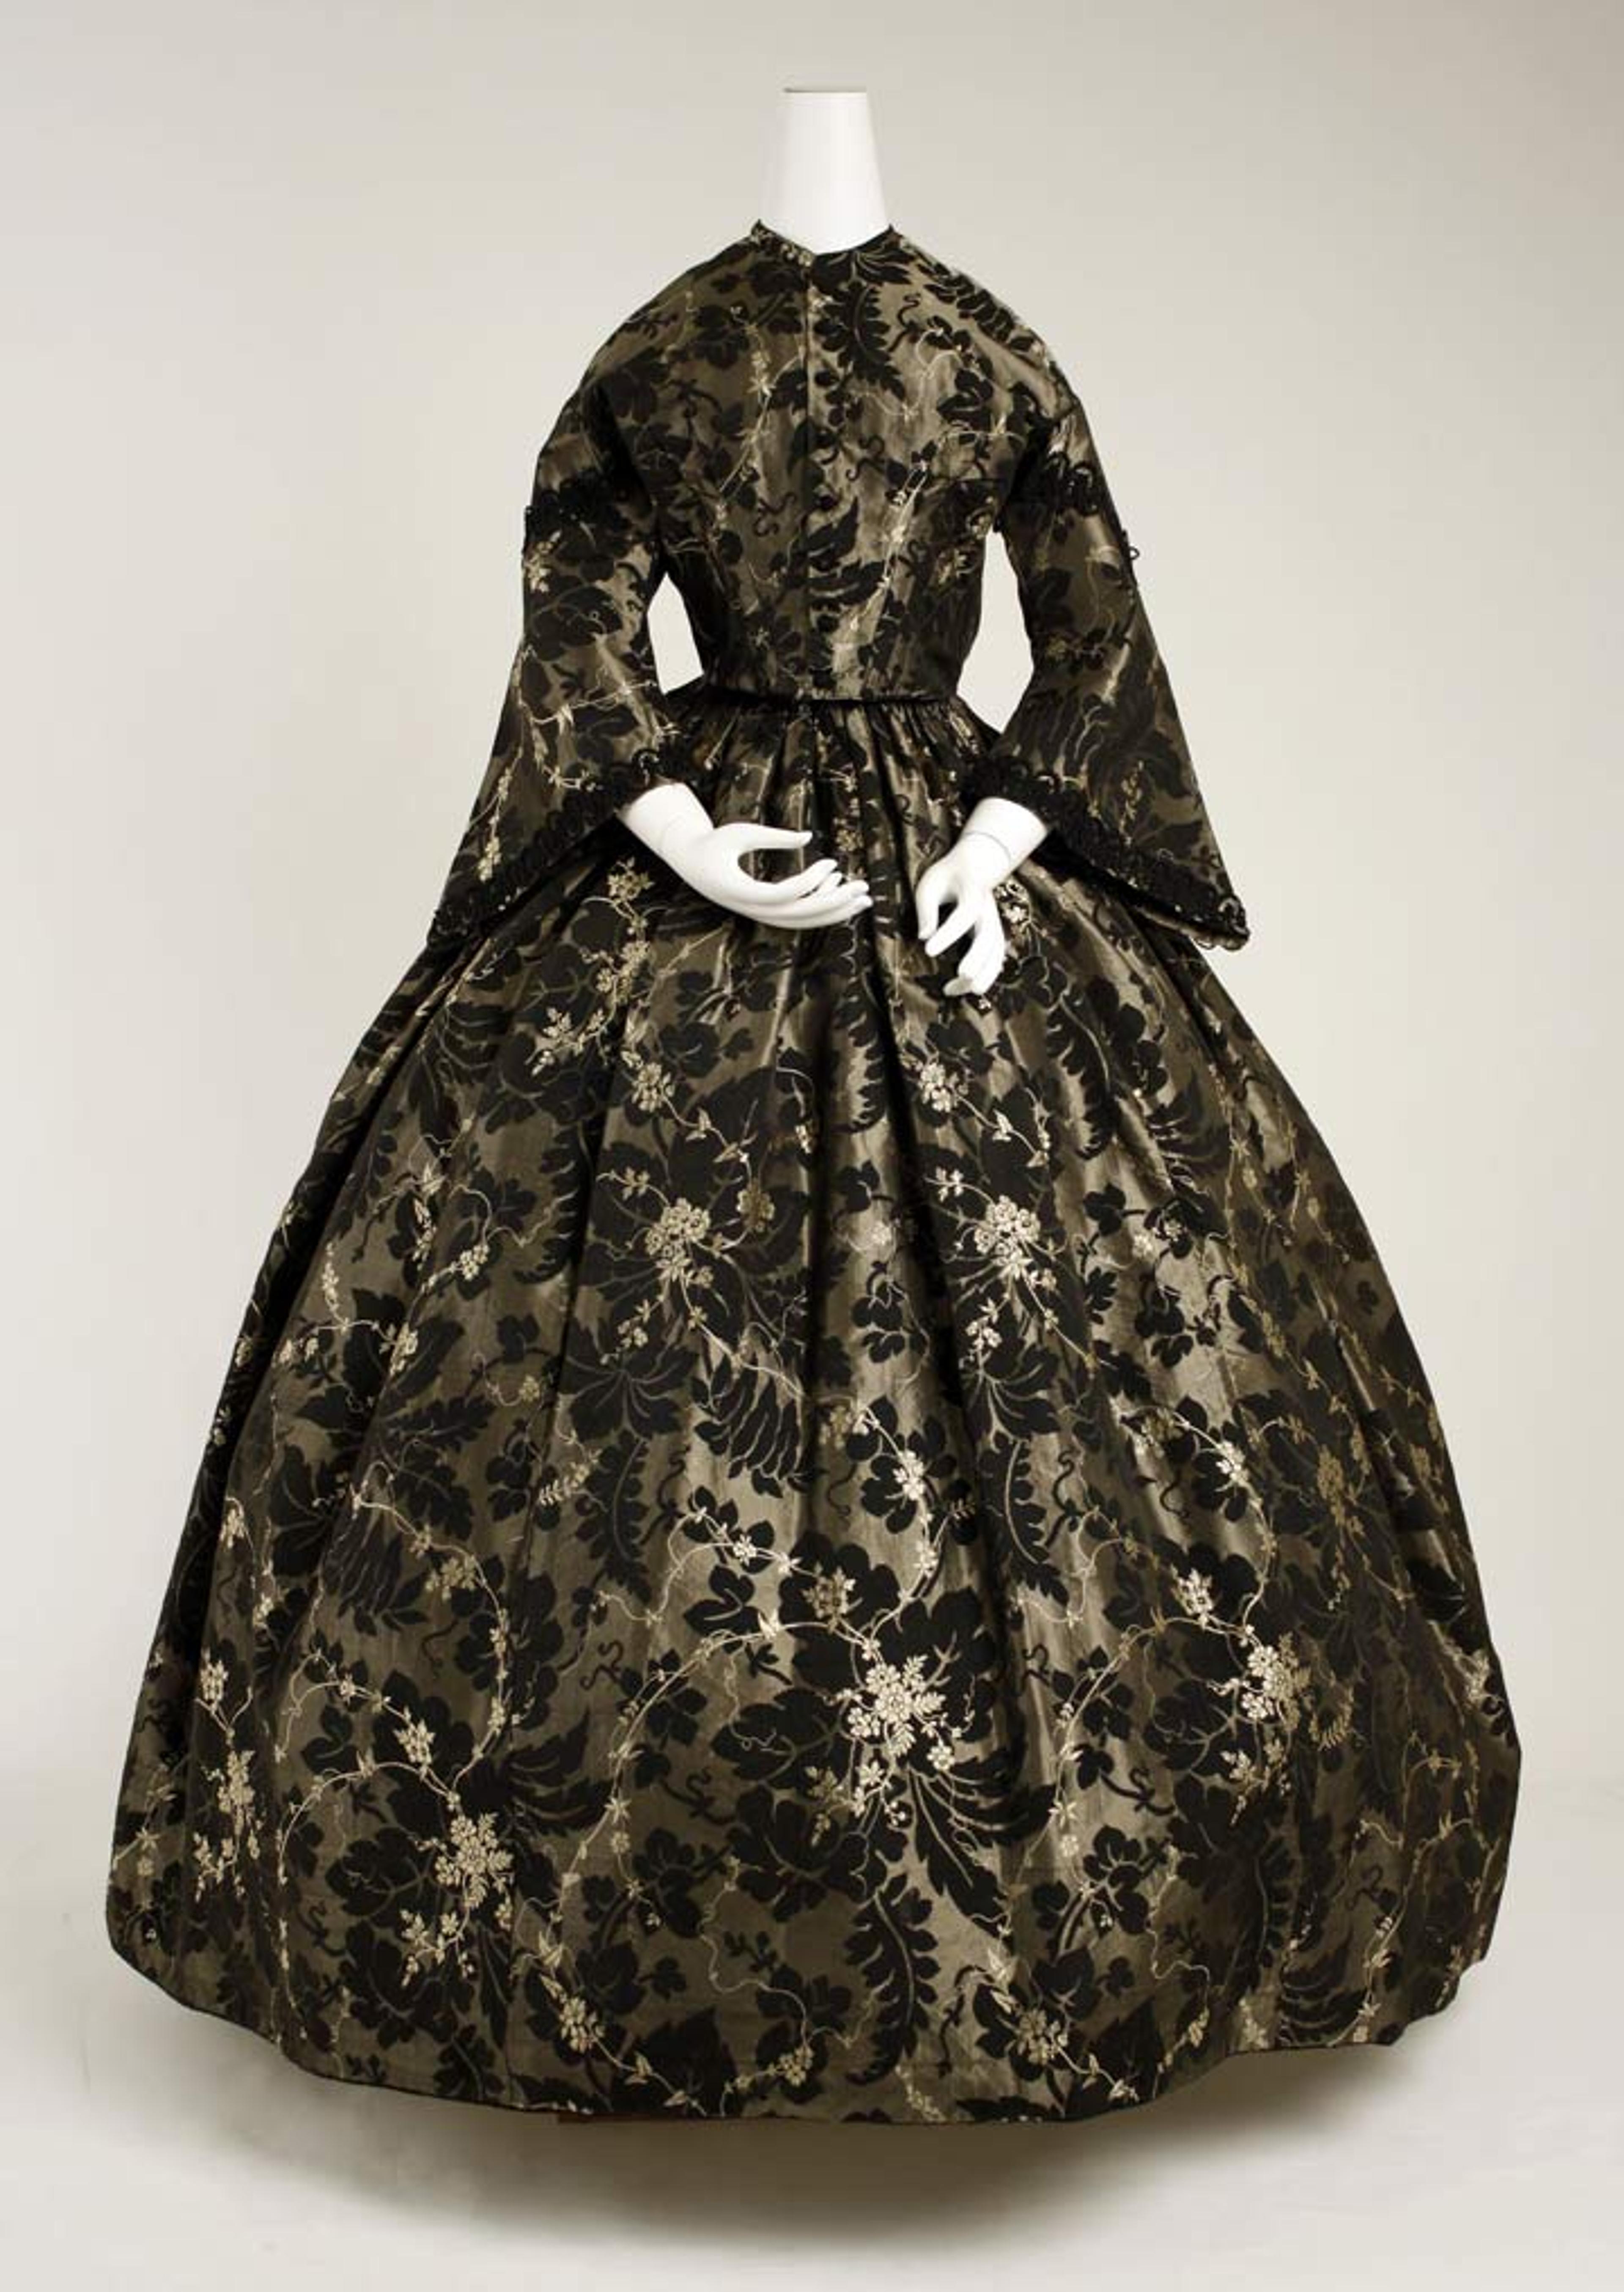 Dress from the 1850s